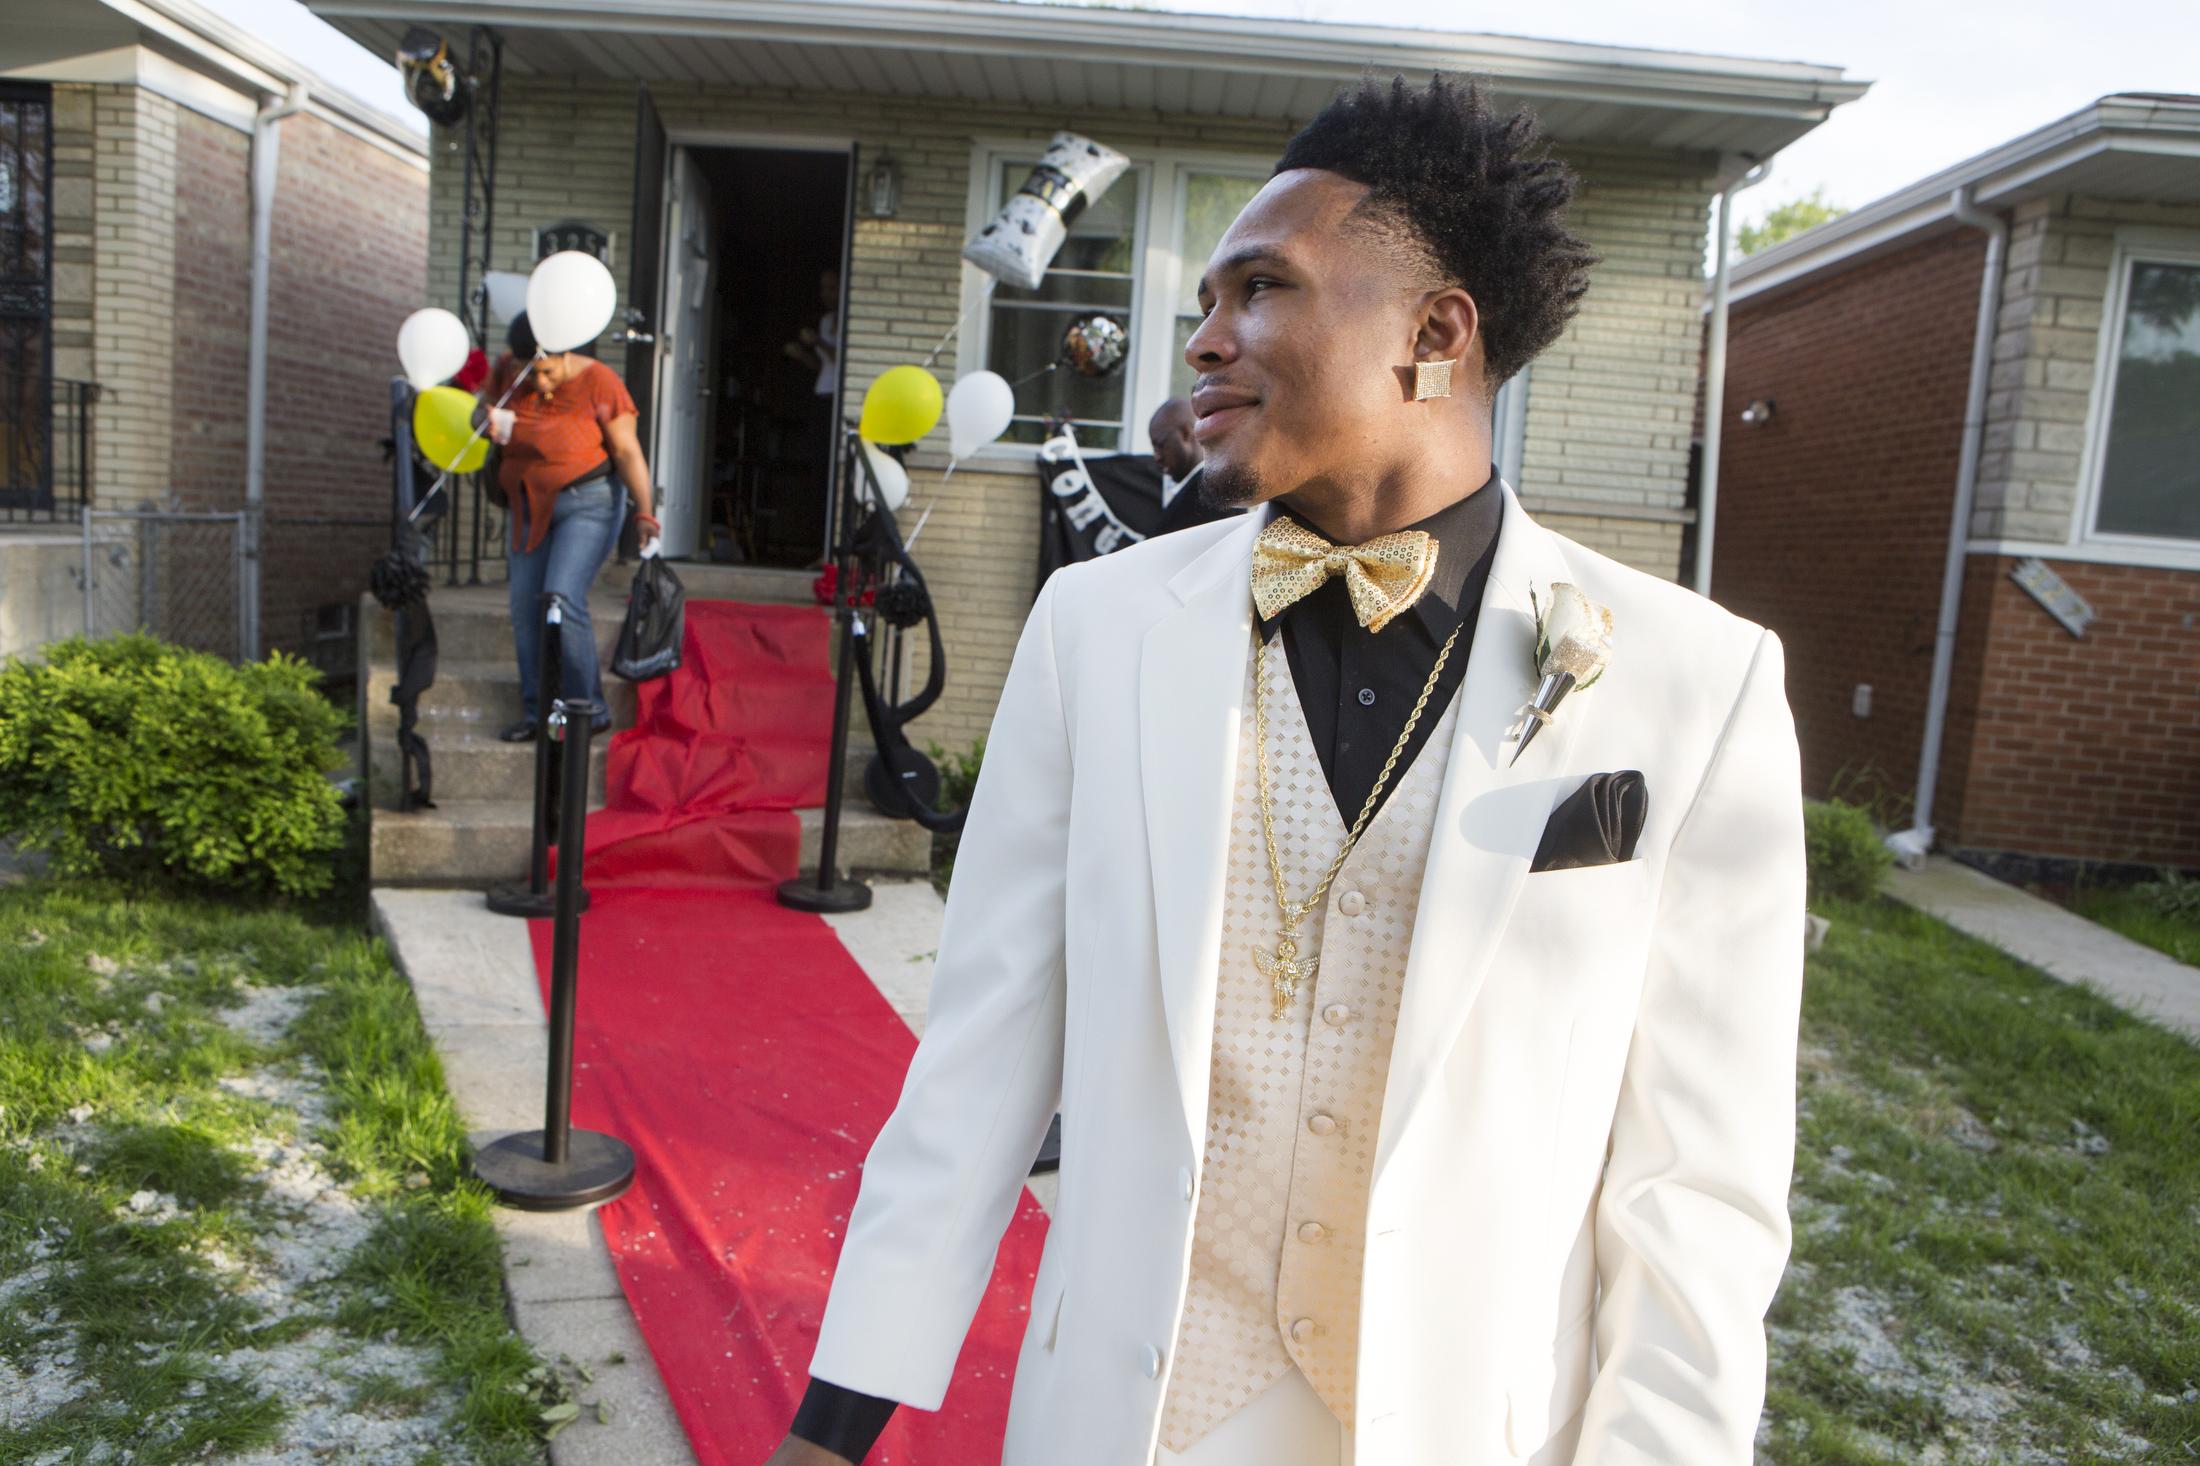 10 years in a boxing gym - Isiah on his High School graduation party and prom night.